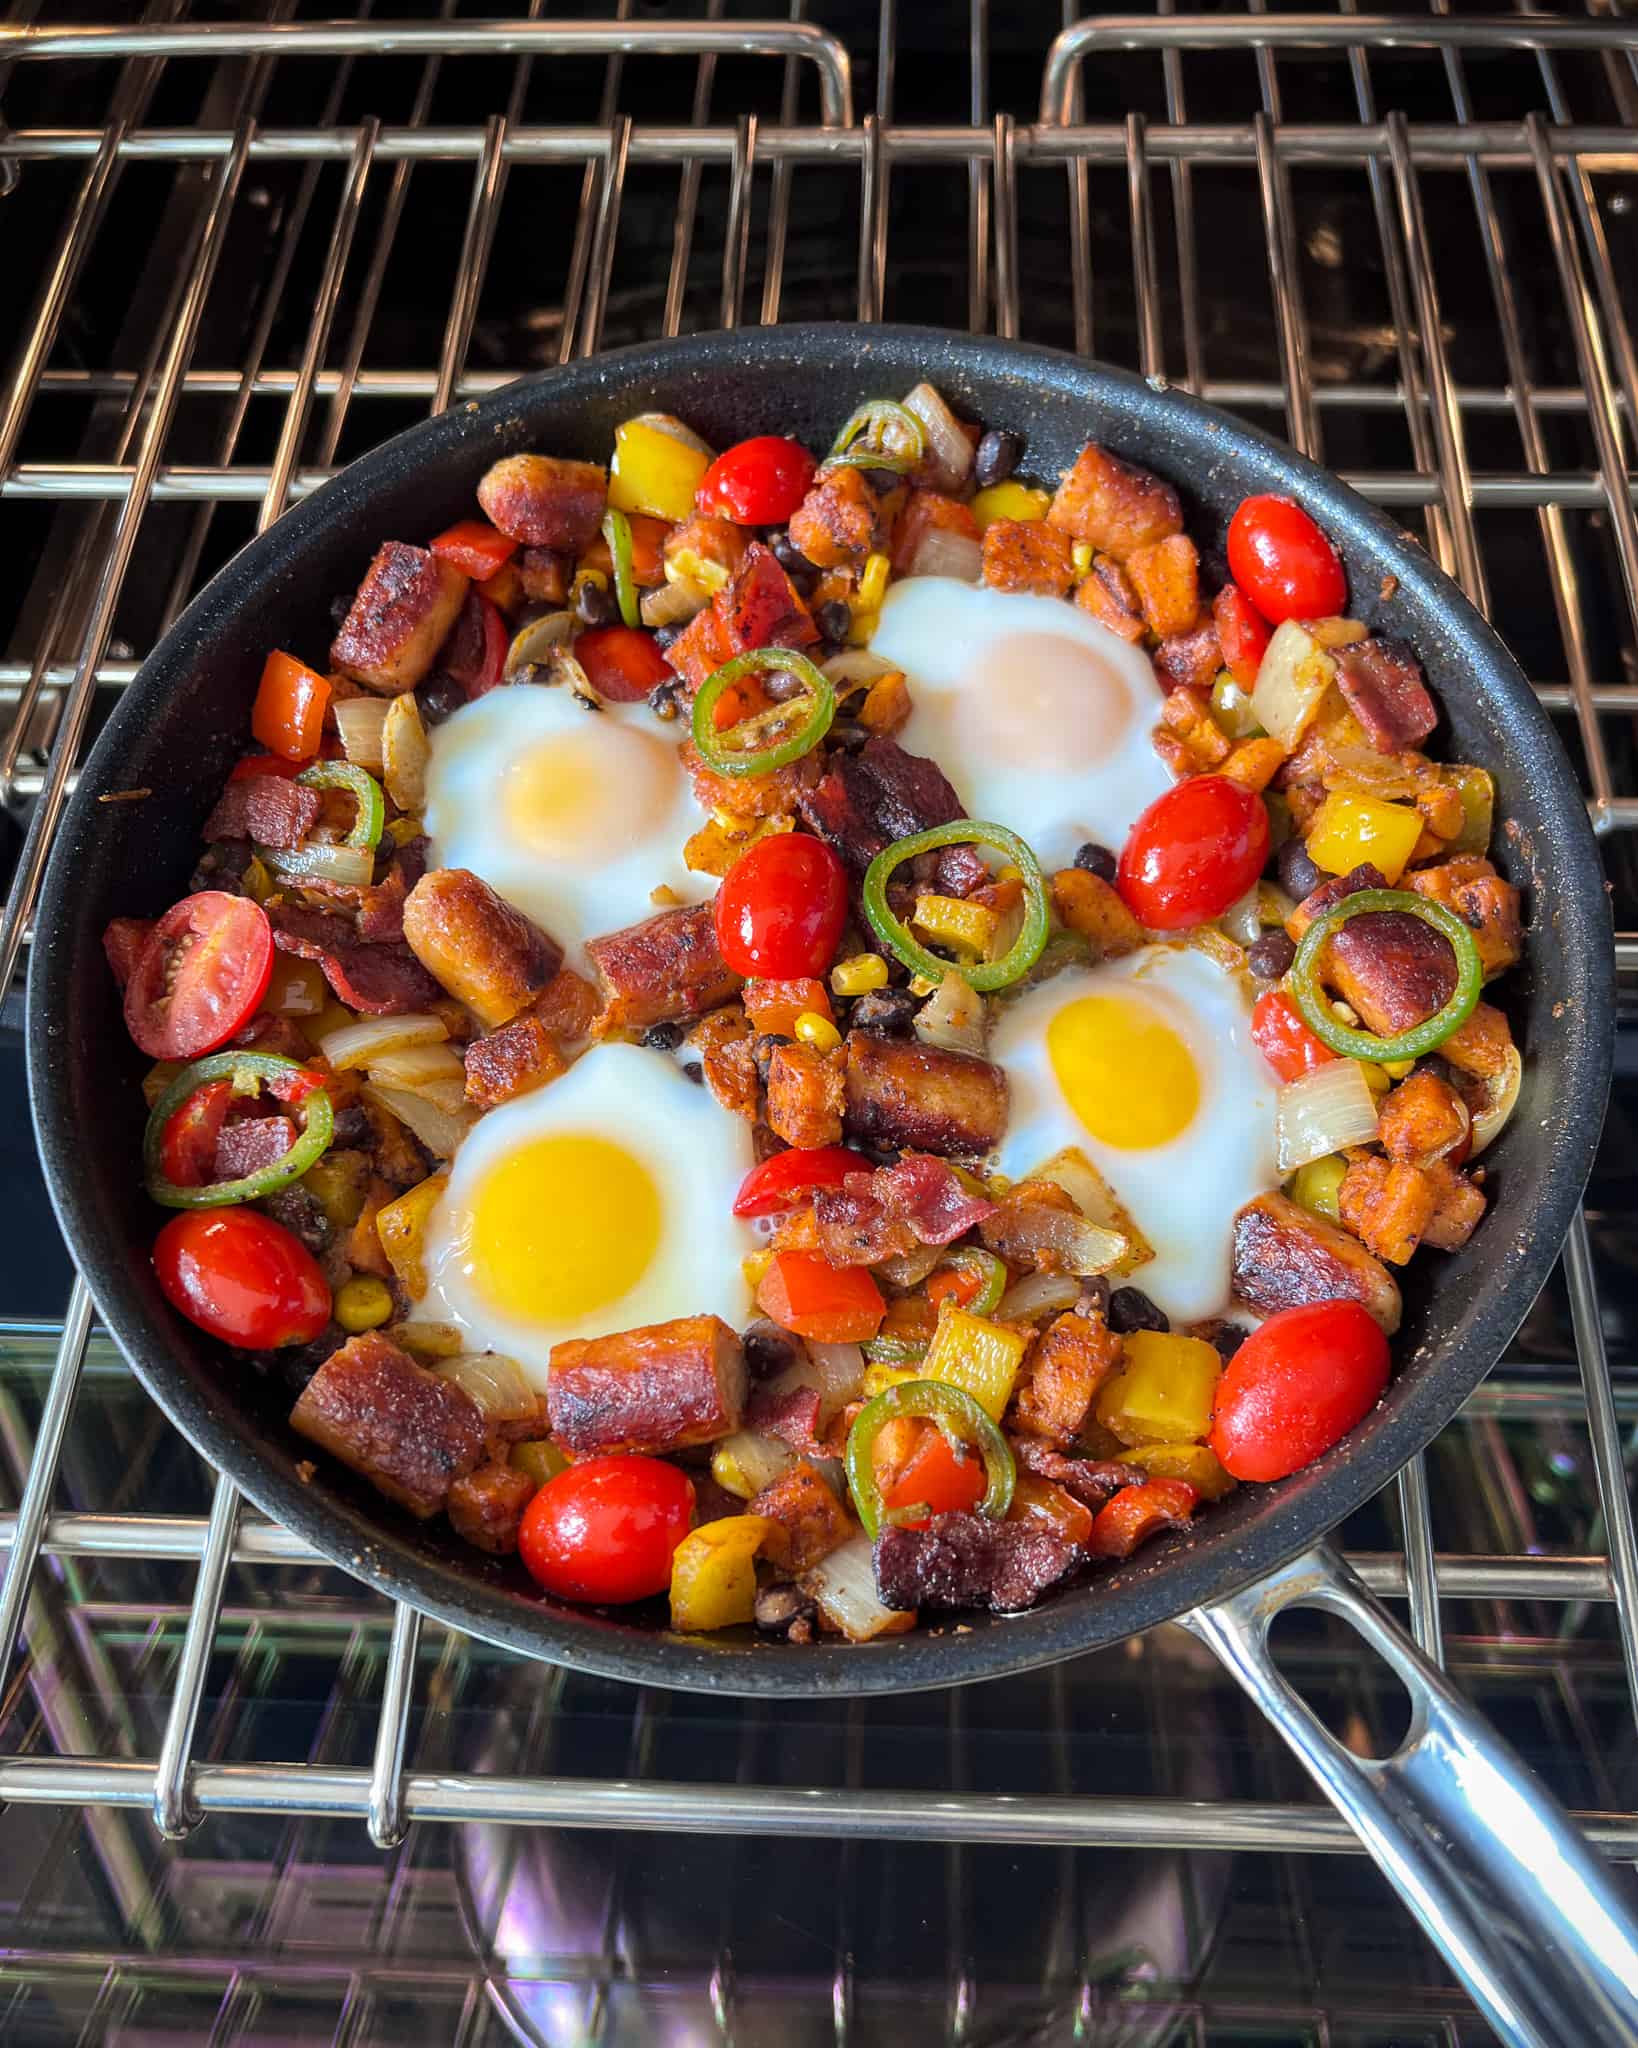 The eggs have cooked in the skillet hash and is ready to eat.